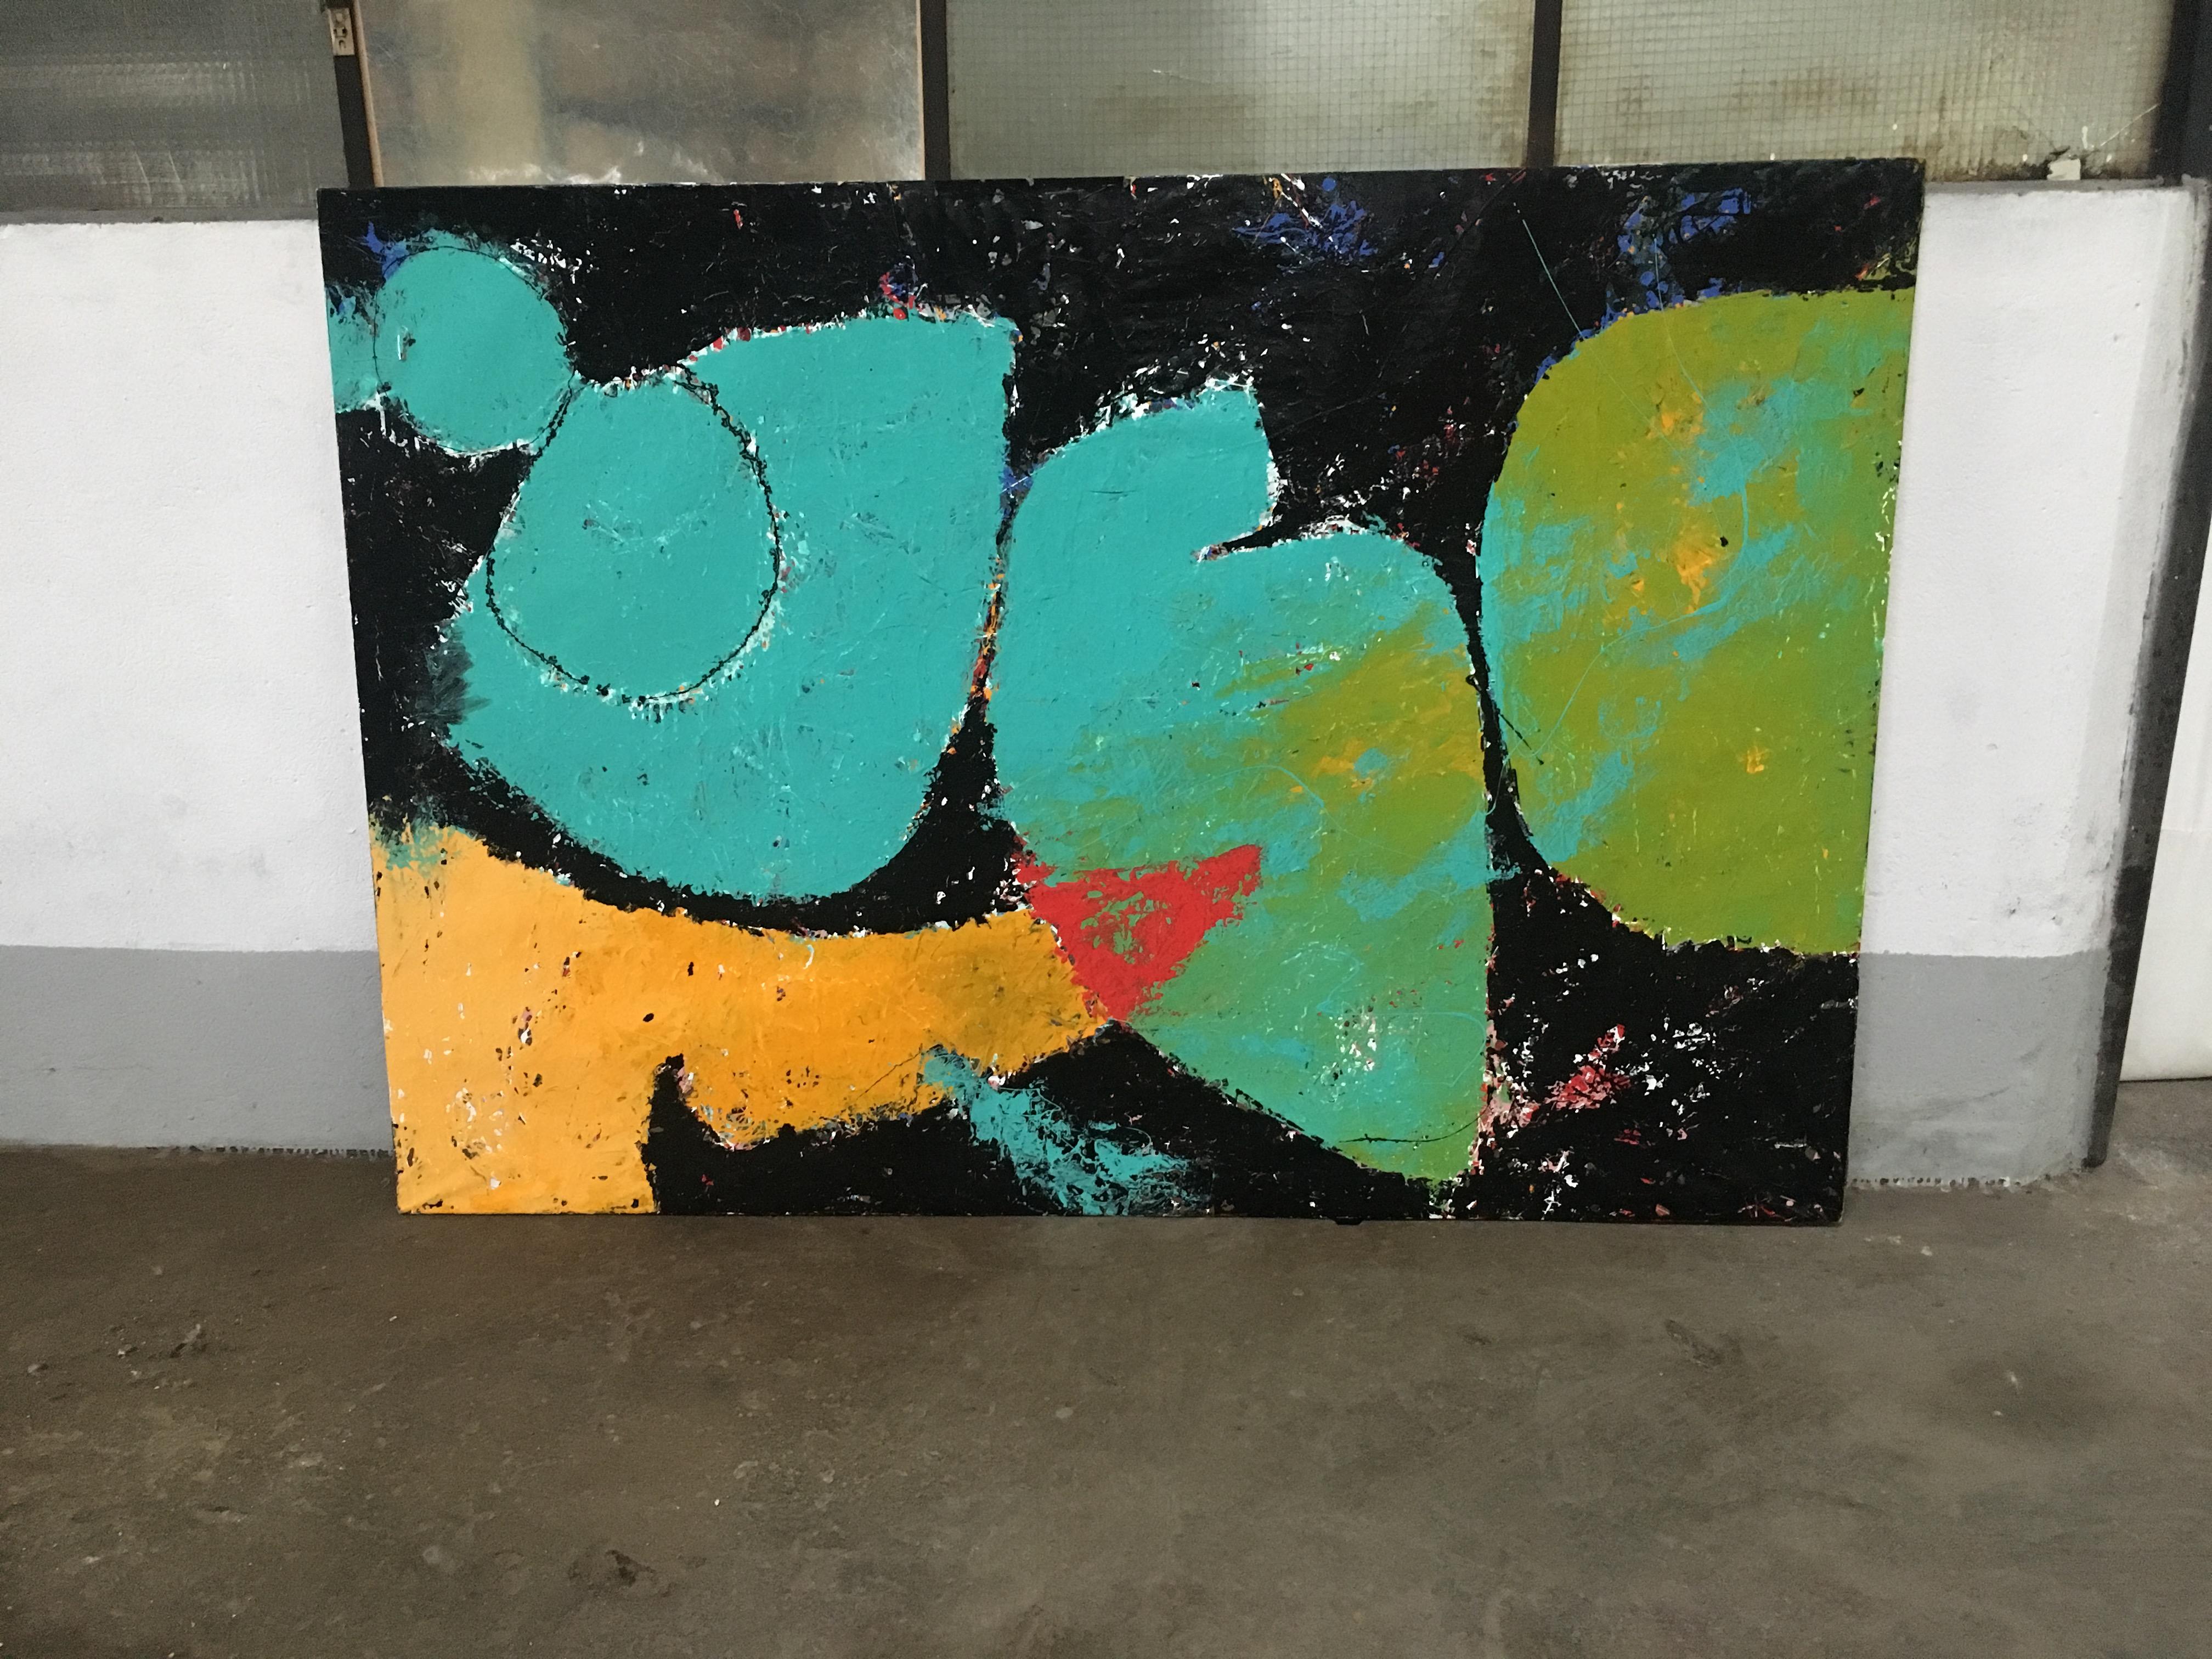 Mid-Century Modern Italian abstract painting on paper with wooden structure, 1970s.
The paper of the paint shows little damages as it is visible from the pictures. This wear consistent with age and use.